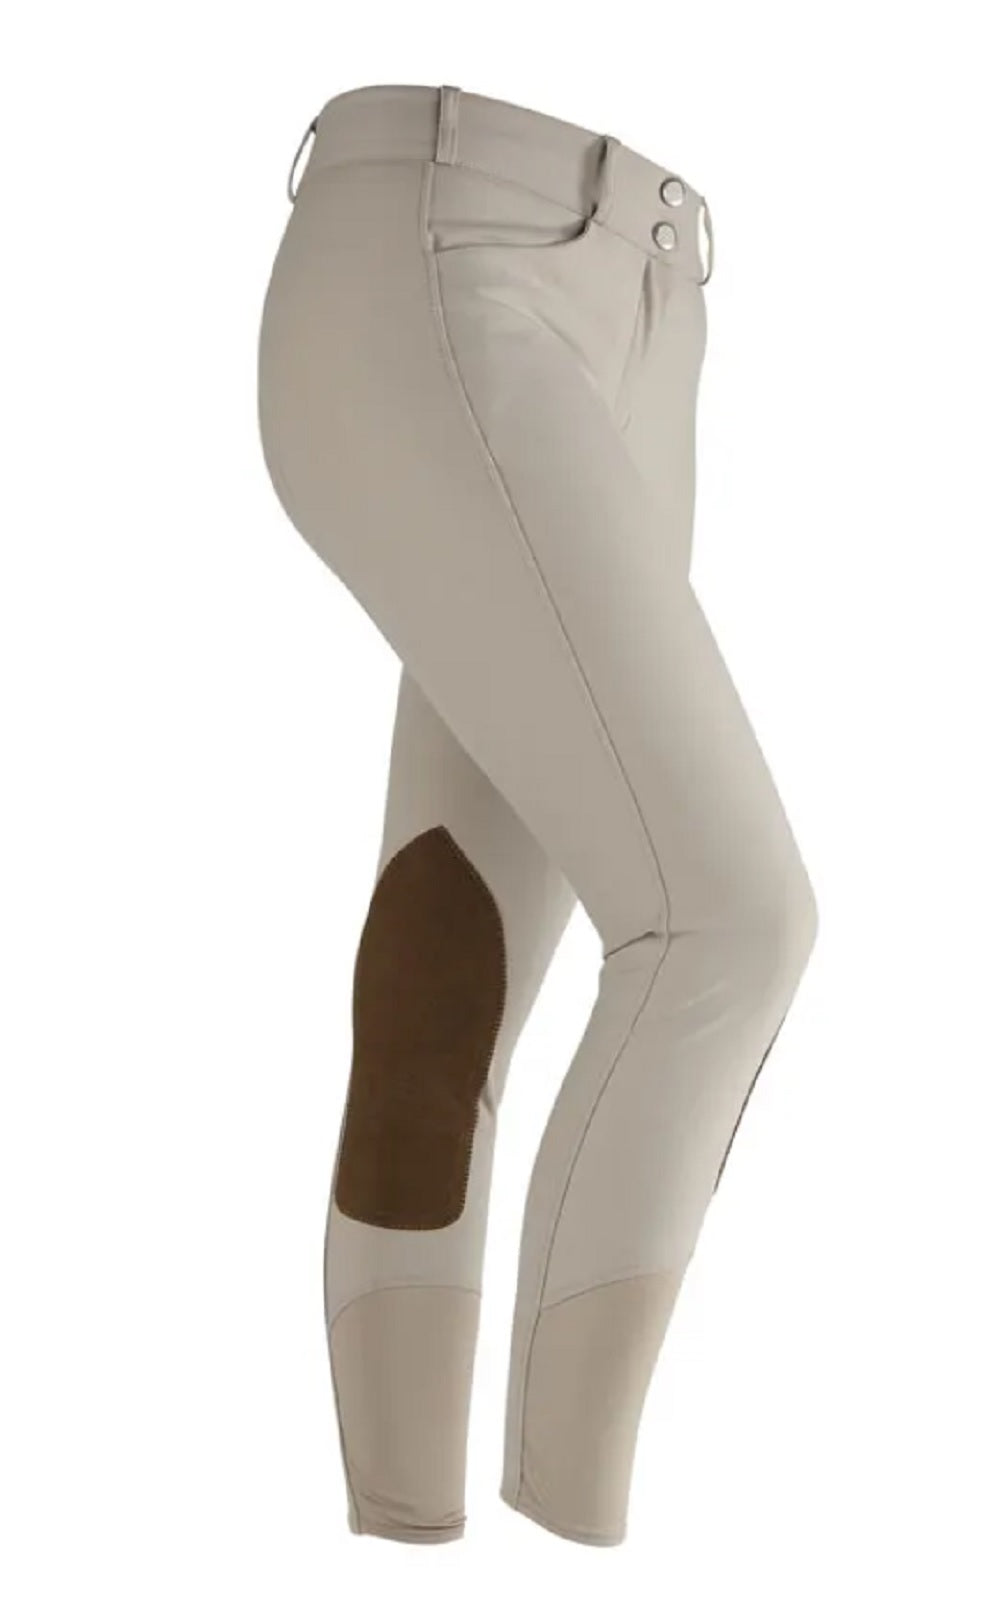 Shires Aubrion Shires Ladies Suffolk Tan Equine Horse Riding Breeches #81000